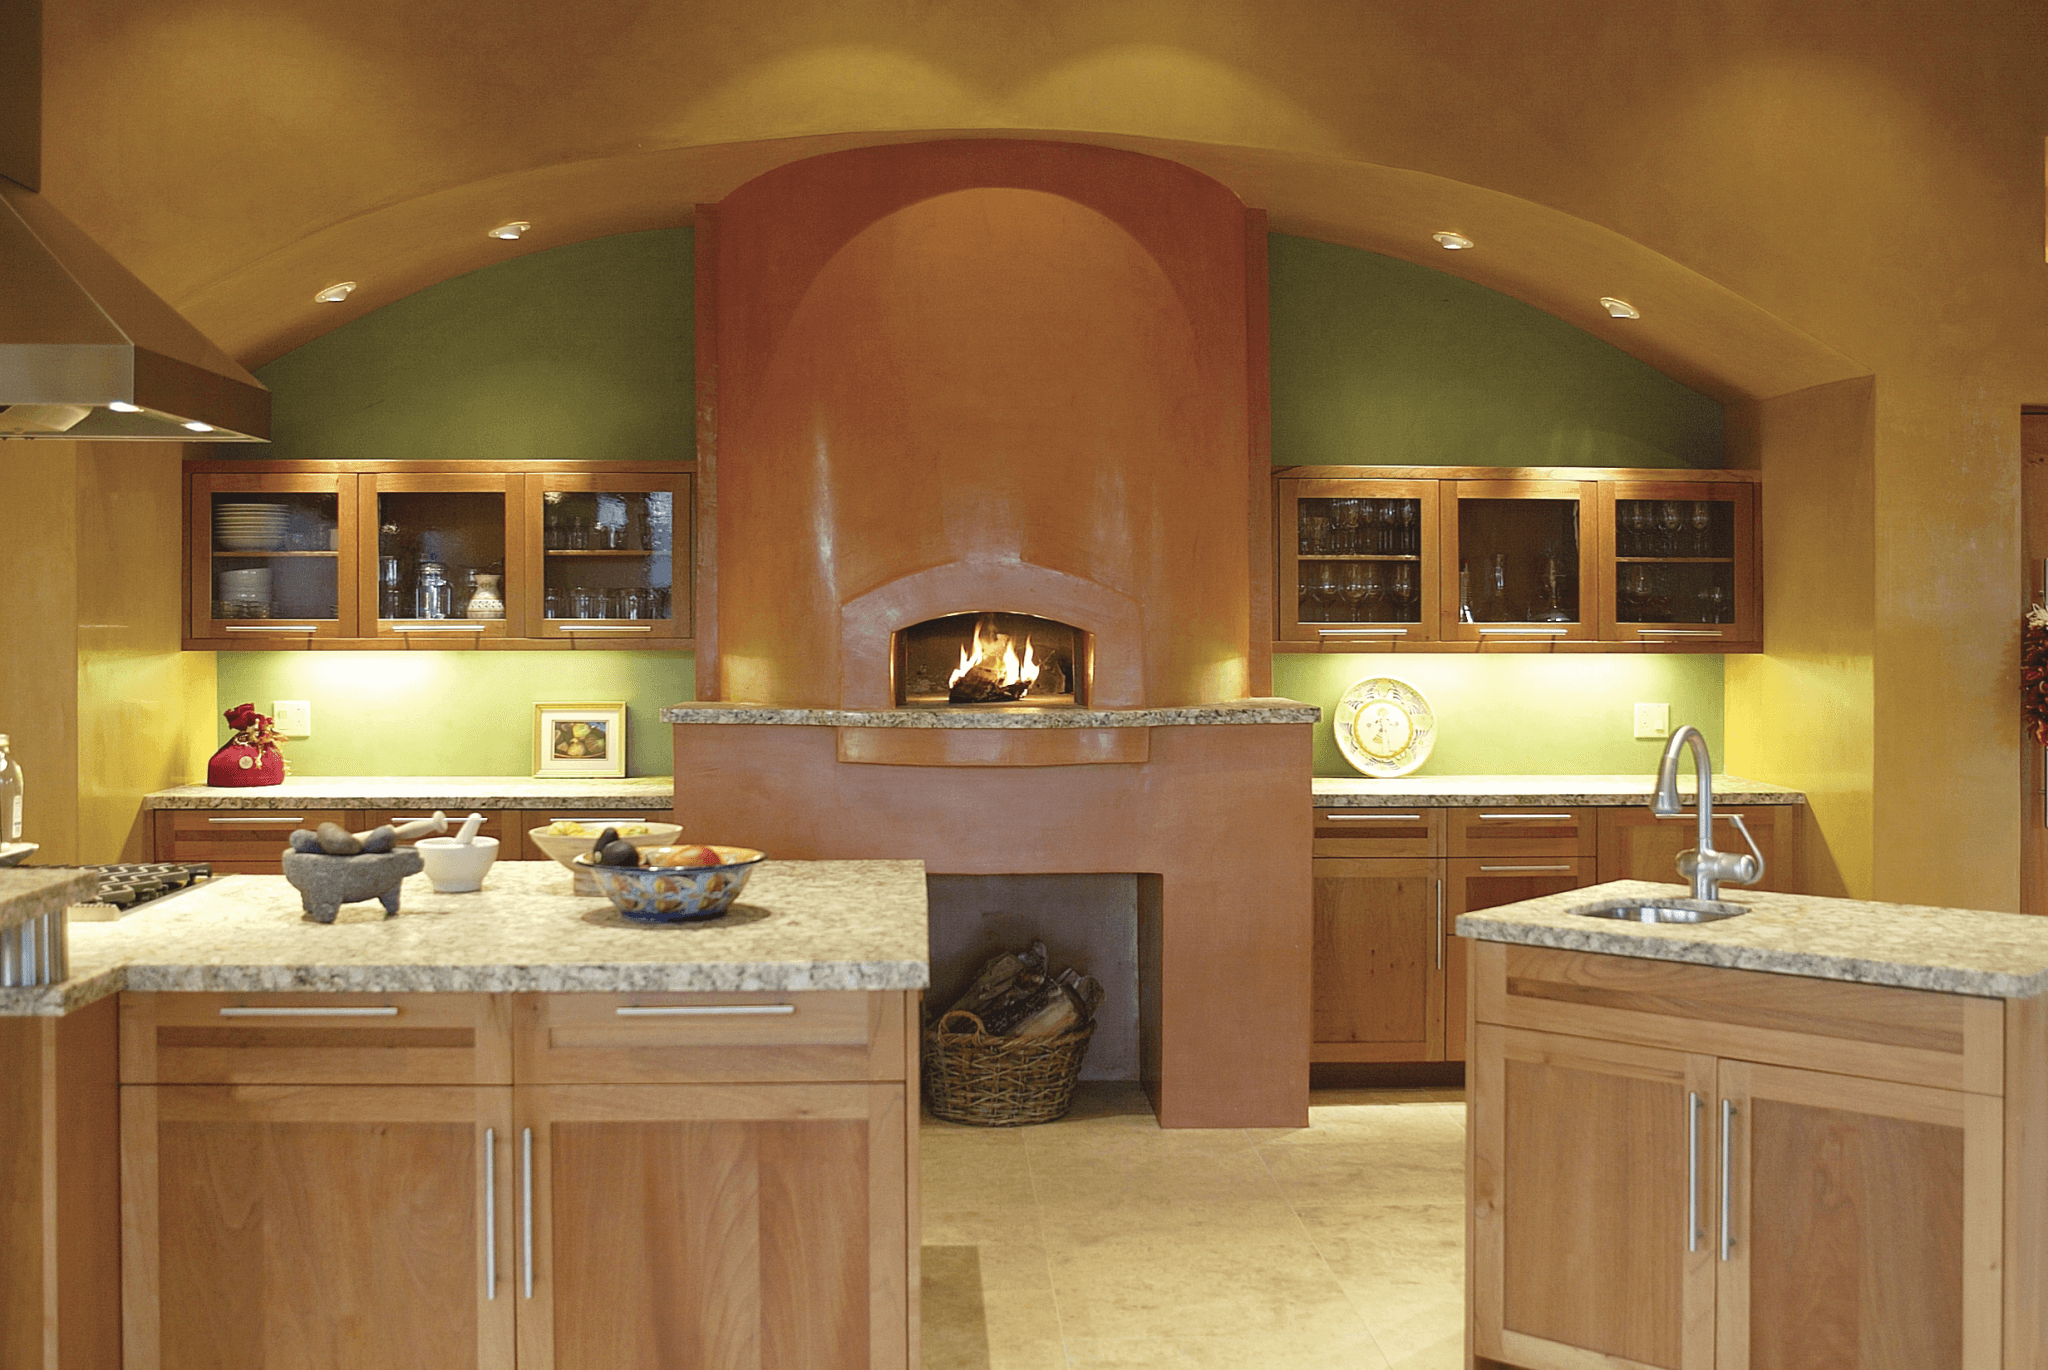 Mugnaini wood fired oven in a residential kitchen